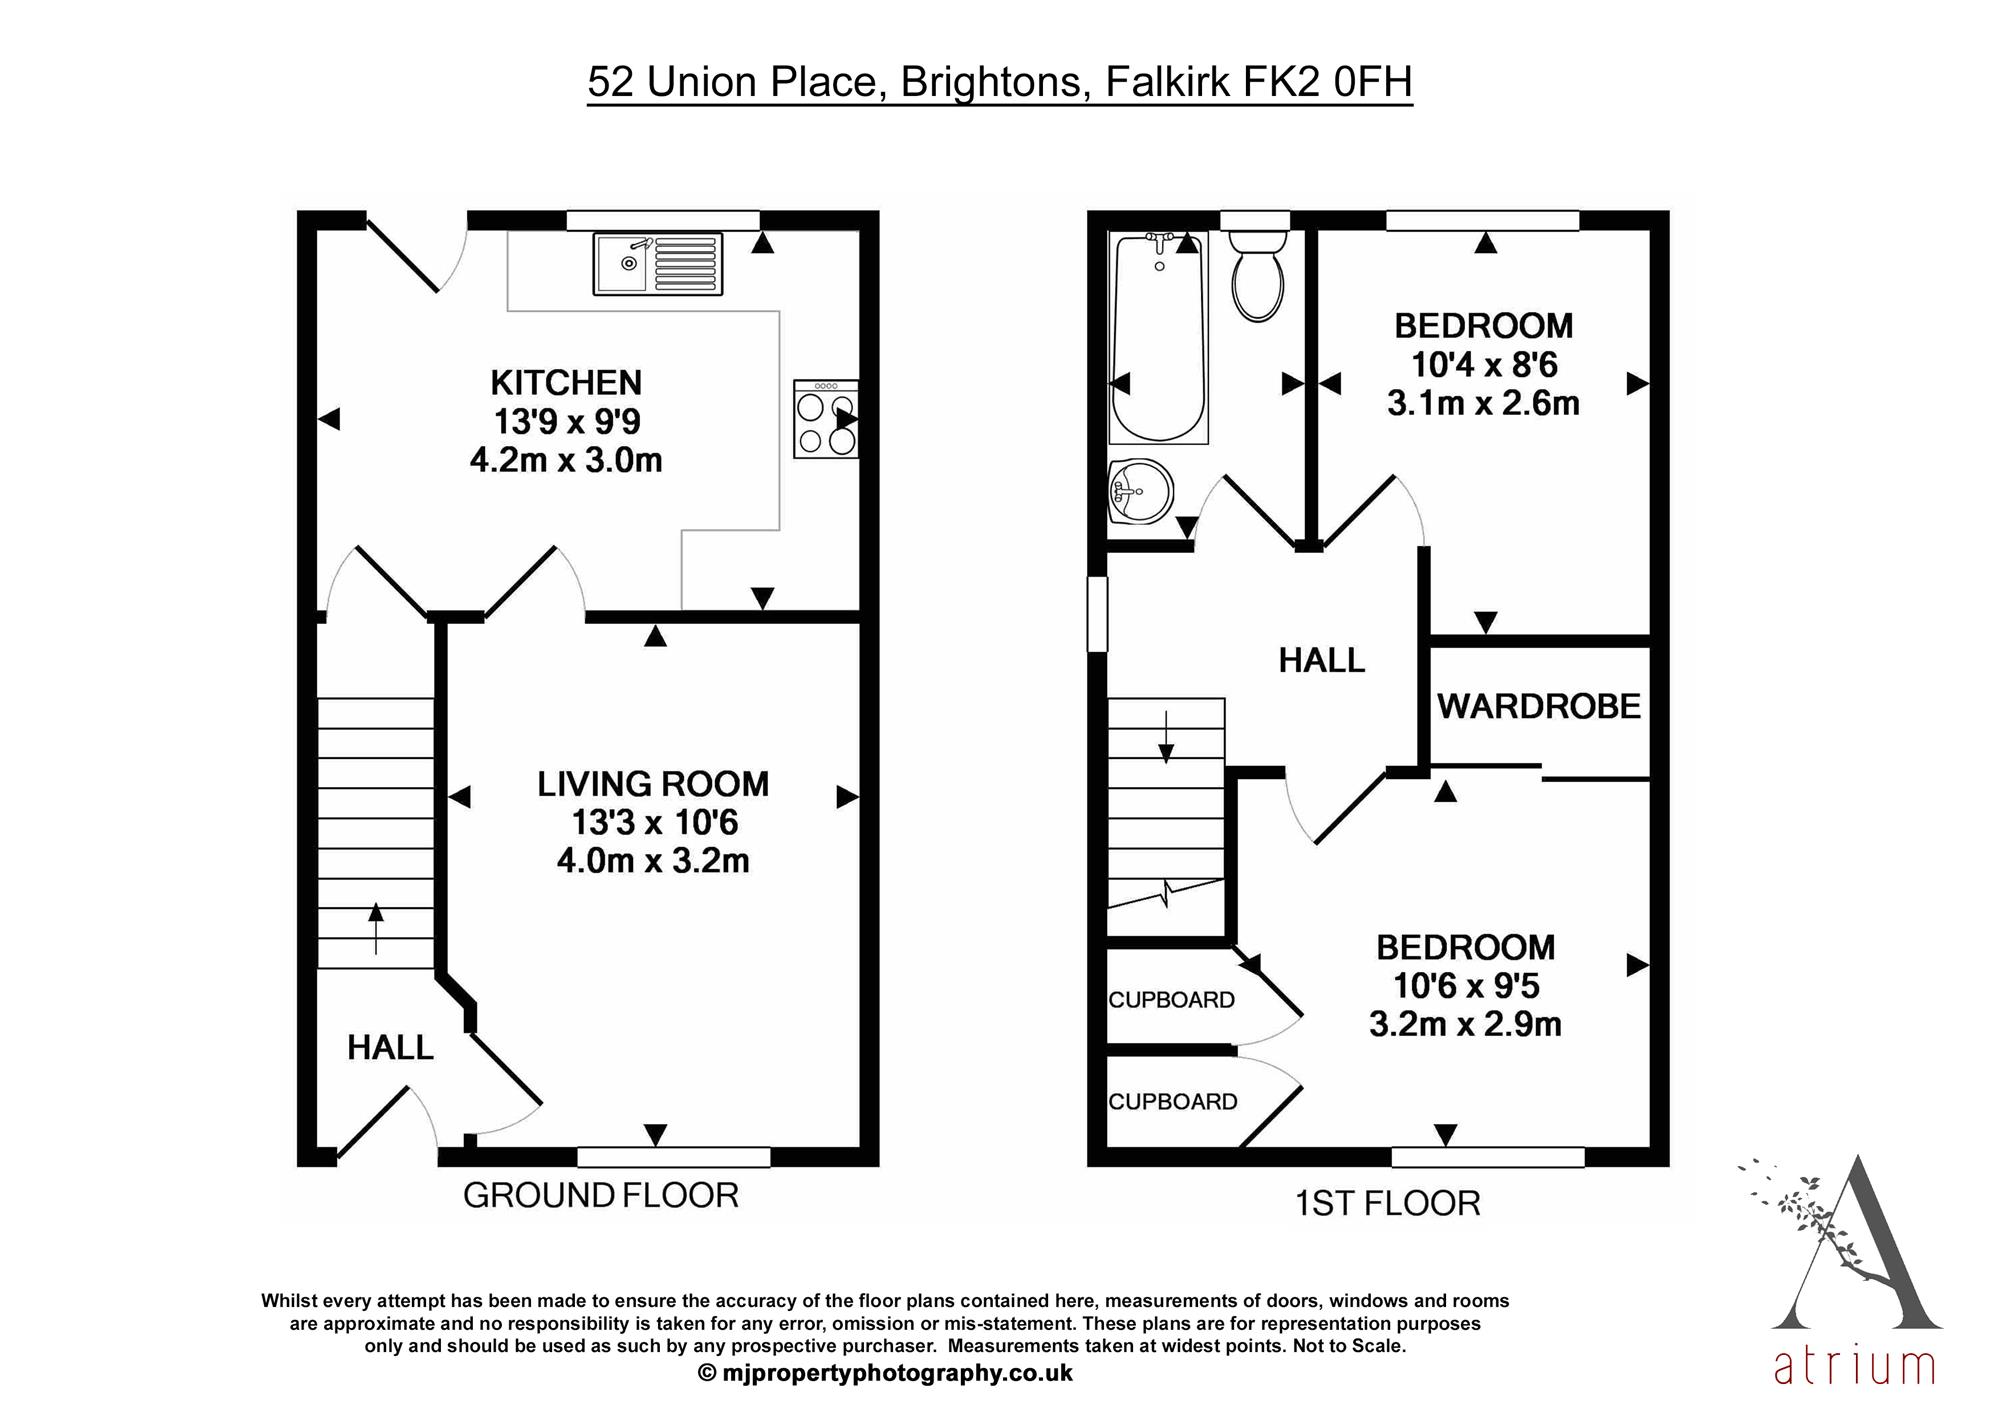 2 Bedrooms Semi-detached house for sale in Union Place, Brightons, Falkirk FK2